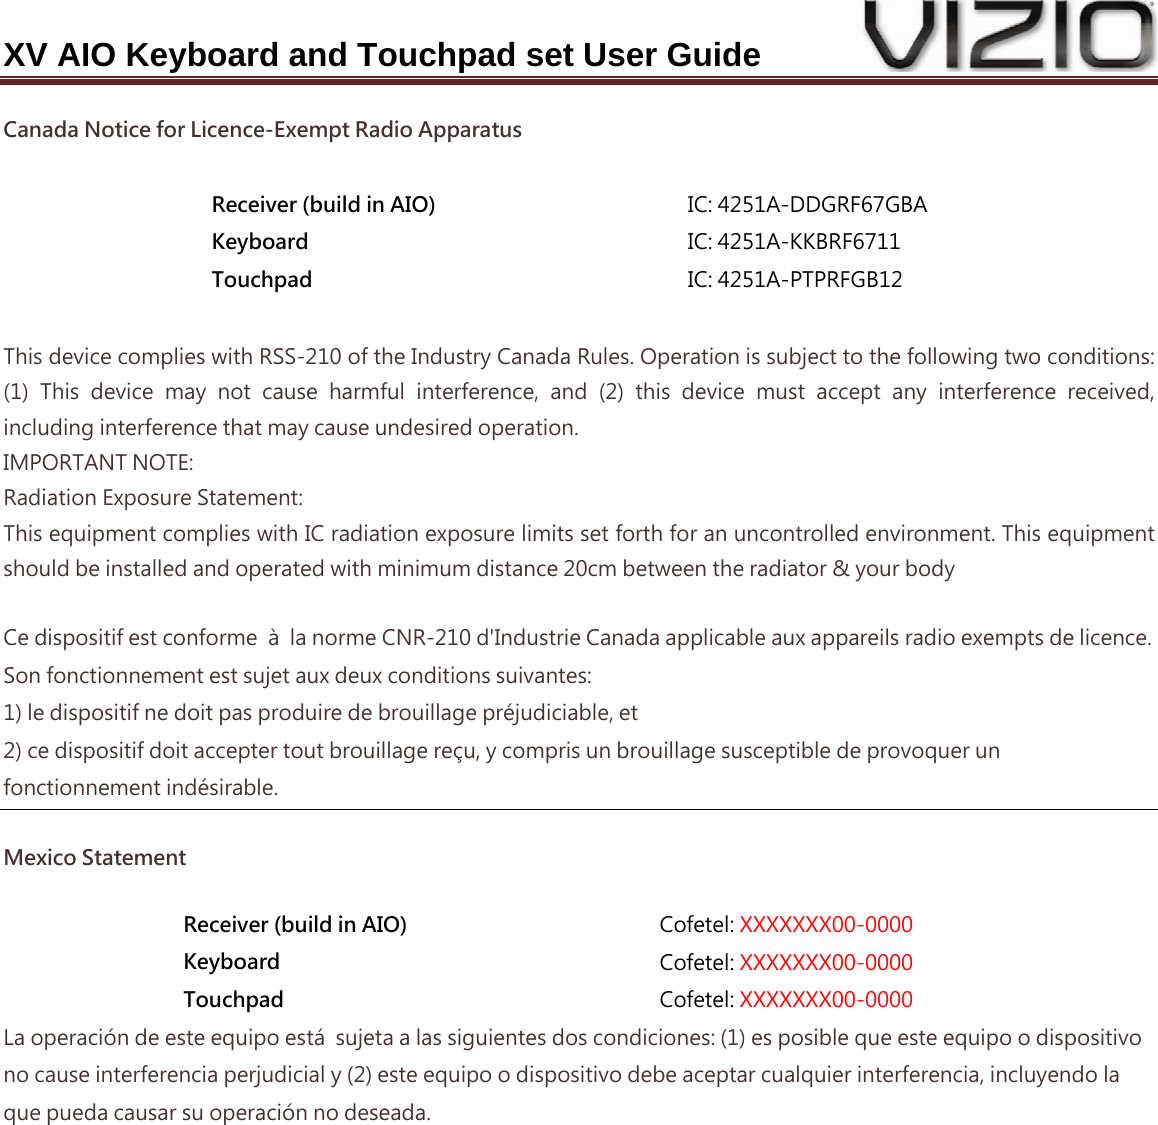 XV AIO Keyboard and Touchpad set User Guide Canada Notice for Licence-Exempt Radio Apparatus  Receiver (build in AIO)  IC: 4251A-DDGRF67GBA Keyboard  IC: 4251A-KKBRF6711 Touchpad  IC: 4251A-PTPRFGB12  This device complies with RSS-210 of the Industry Canada Rules. Operation is subject to the following two conditions: (1)  This  device  may  not  cause  harmful  interference,  and  (2)  this  device  must  accept  any  interference  received, including interference that may cause undesired operation. IMPORTANT NOTE: Radiation Exposure Statement: This equipment complies with IC radiation exposure limits set forth for an uncontrolled environment. This equipment should be installed and operated with minimum distance 20cm between the radiator &amp; your body  Ce dispositif est conforme  à  la norme CNR-210 d&apos;Industrie Canada applicable aux appareils radio exempts de licence. Son fonctionnement est sujet aux deux conditions suivantes: 1) le dispositif ne doit pas produire de brouillage préjudiciable, et 2) ce dispositif doit accepter tout brouillage reçu, y compris un brouillage susceptible de provoquer un fonctionnement indésirable. Mexico Statement Receiver (build in AIO)  Cofetel: XXXXXXX00-0000 Keyboard  Cofetel: XXXXXXX00-0000 Touchpad  Cofetel: XXXXXXX00-0000 La operación de este equipo está  sujeta a las siguientes dos condiciones: (1) es posible que este equipo o dispositivo no cause interferencia perjudicial y (2) este equipo o dispositivo debe aceptar cualquier interferencia, incluyendo la que pueda causar su operación no deseada. 